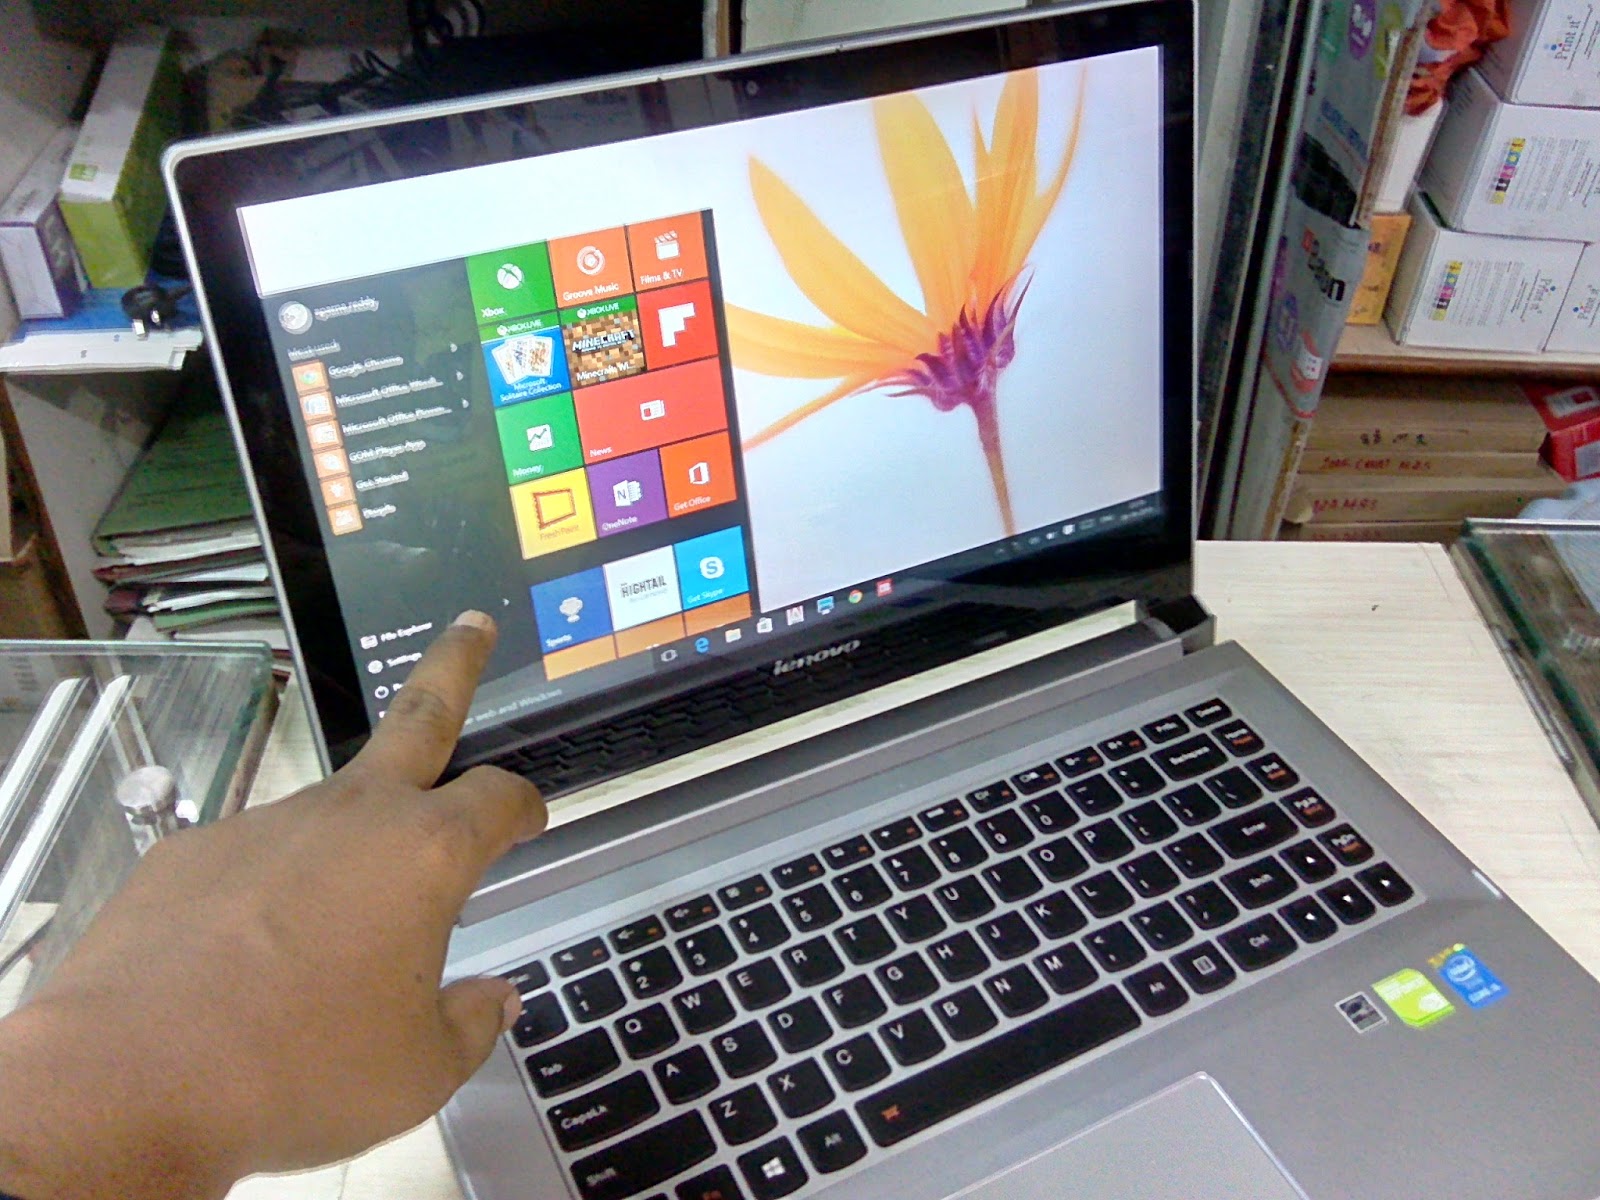 Learn New Things: Lenovo Flex 2-14 Touch Screen Laptop (i5/4GB/500GB/2GB) Price, Spec. & Review